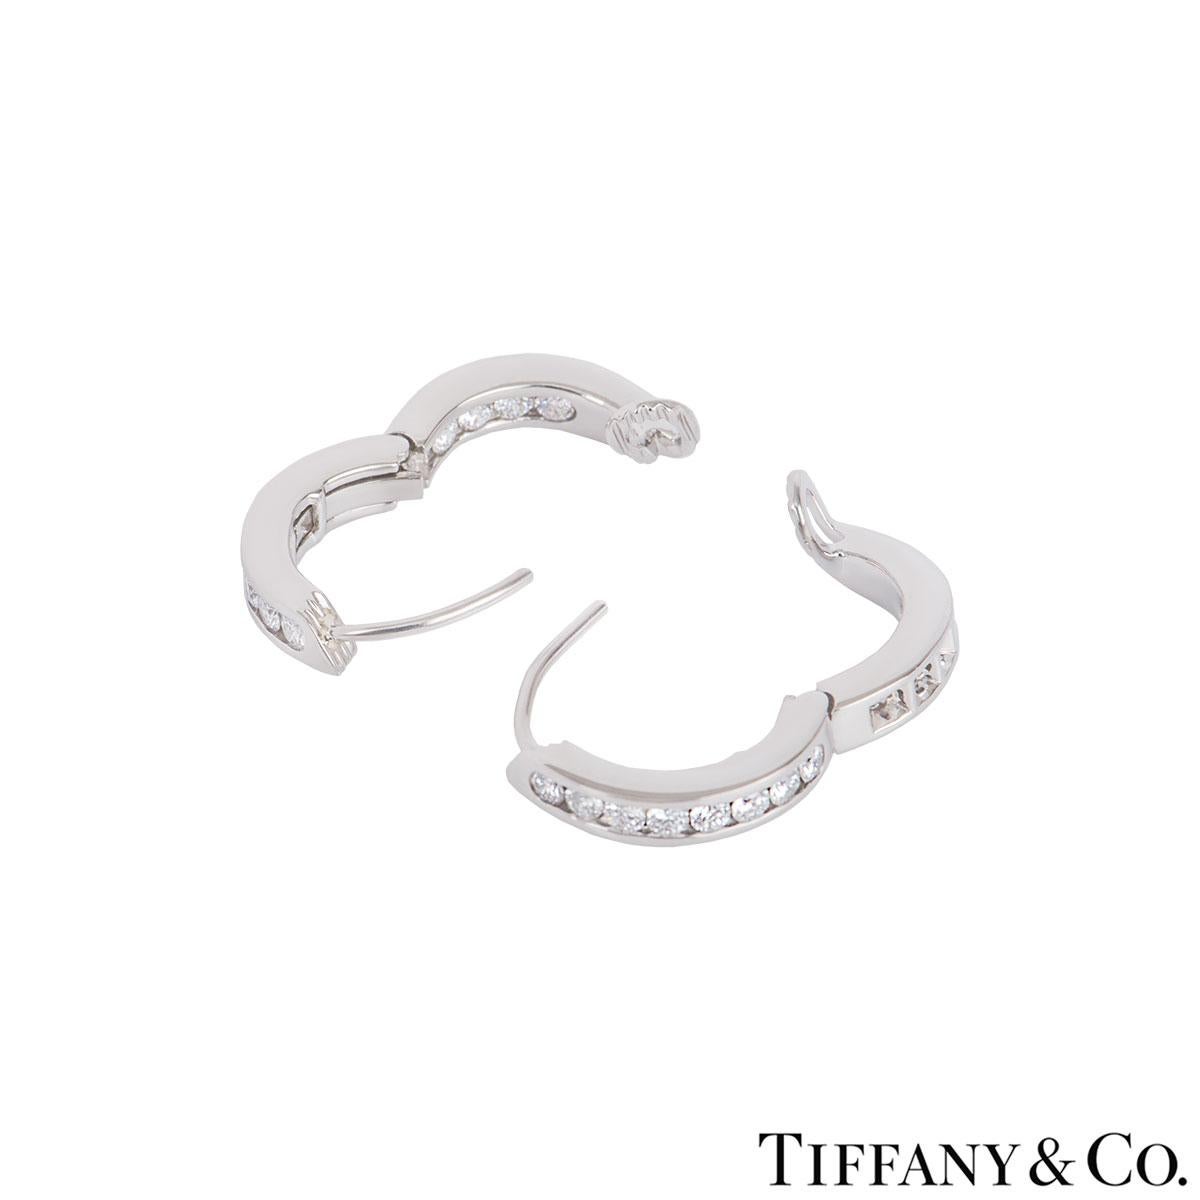 A beautiful pair of platinum diamond hoop earrings by Tiffany & Co. The earrings feature 12 round brilliant cut diamonds set on the outside and inside of the earrings in a channel setting with an approximate total weight of 0.72ct. The earrings